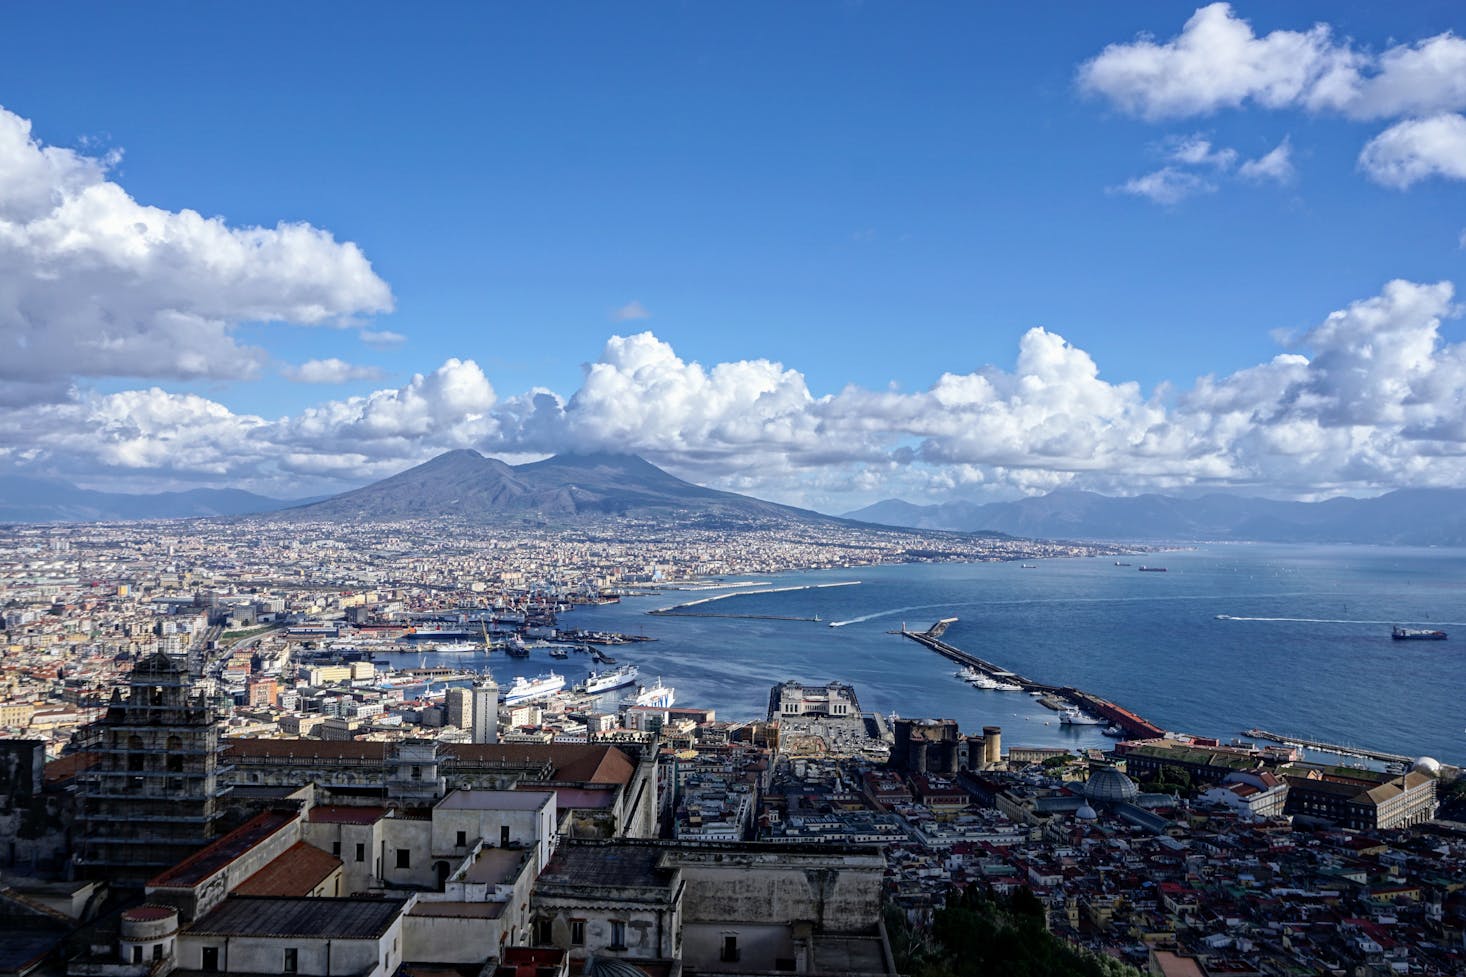 Visiting Naples on a budget